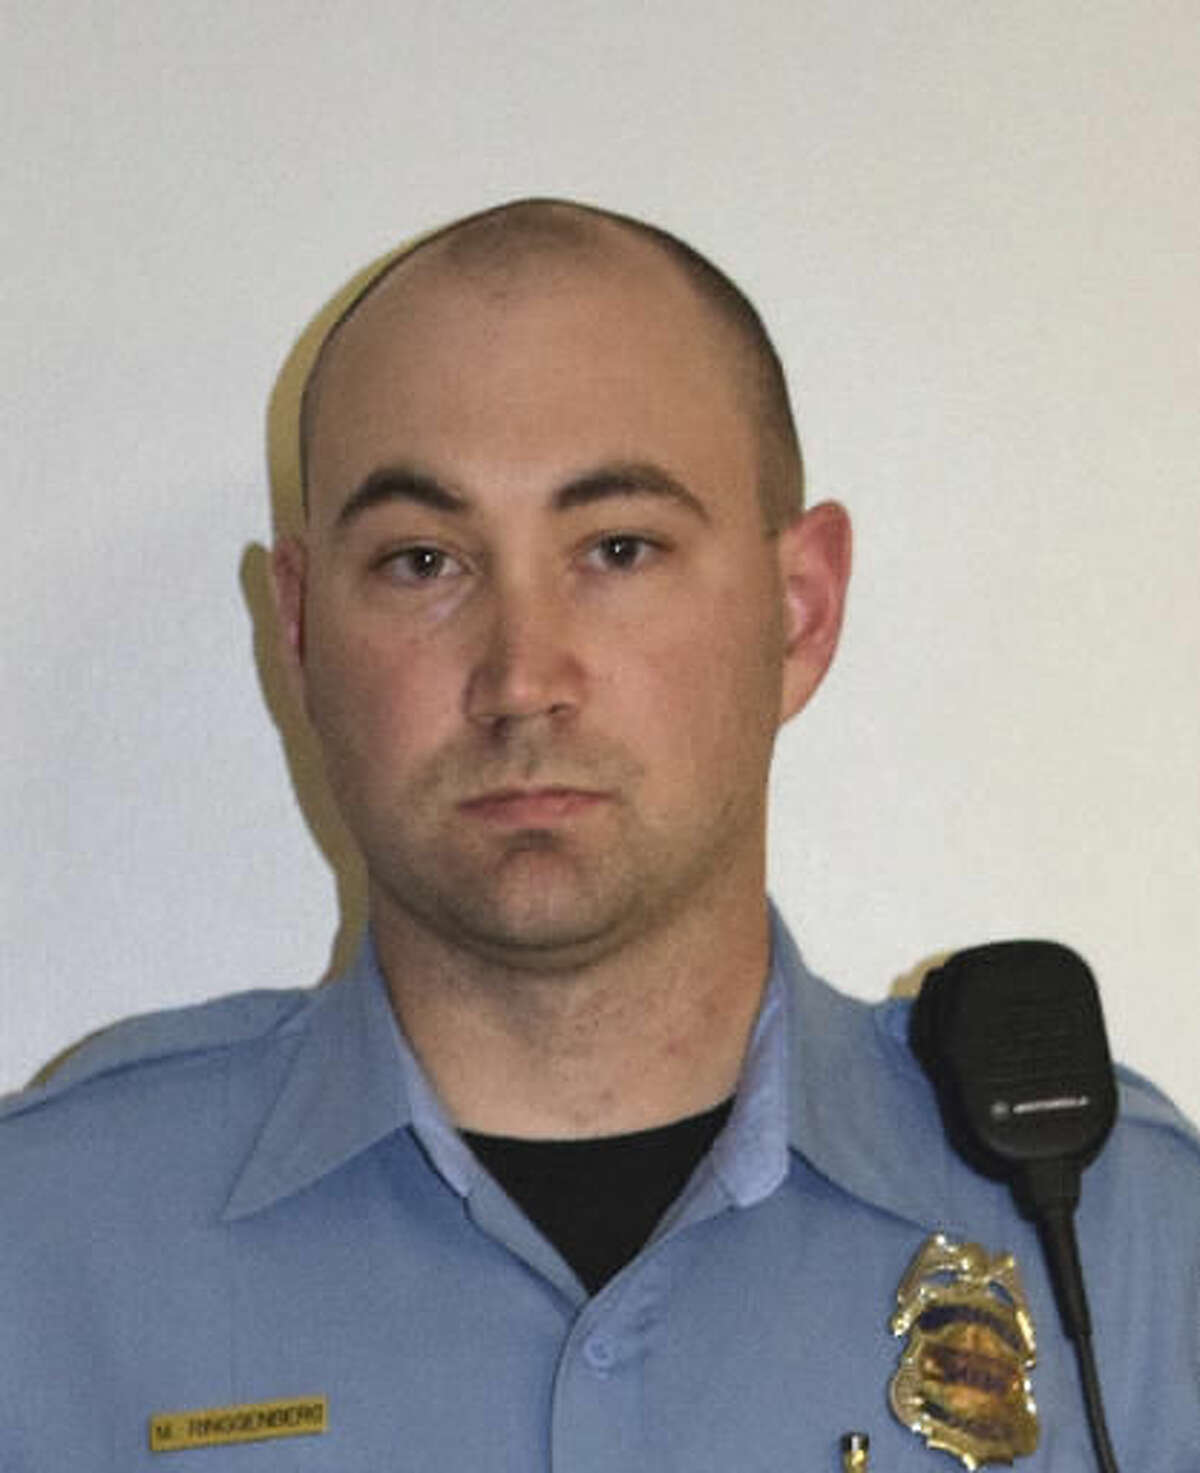 FILE - This undated file photo provided by the Minneapolis Police Department shows Officer Mark Ringgenberg. Officers Ringgenberg and Dustin Schwarze, two white police officers, were involved in the fatal shooting of a black man last fall. The officers followed proper procedure in a confrontation that led to the fatal shooting of Jamar Clark in November, and won't face discipline, the city's police chief announced Friday, Oct. 21, 2016. (Minneapolis Police Department via AP, File)